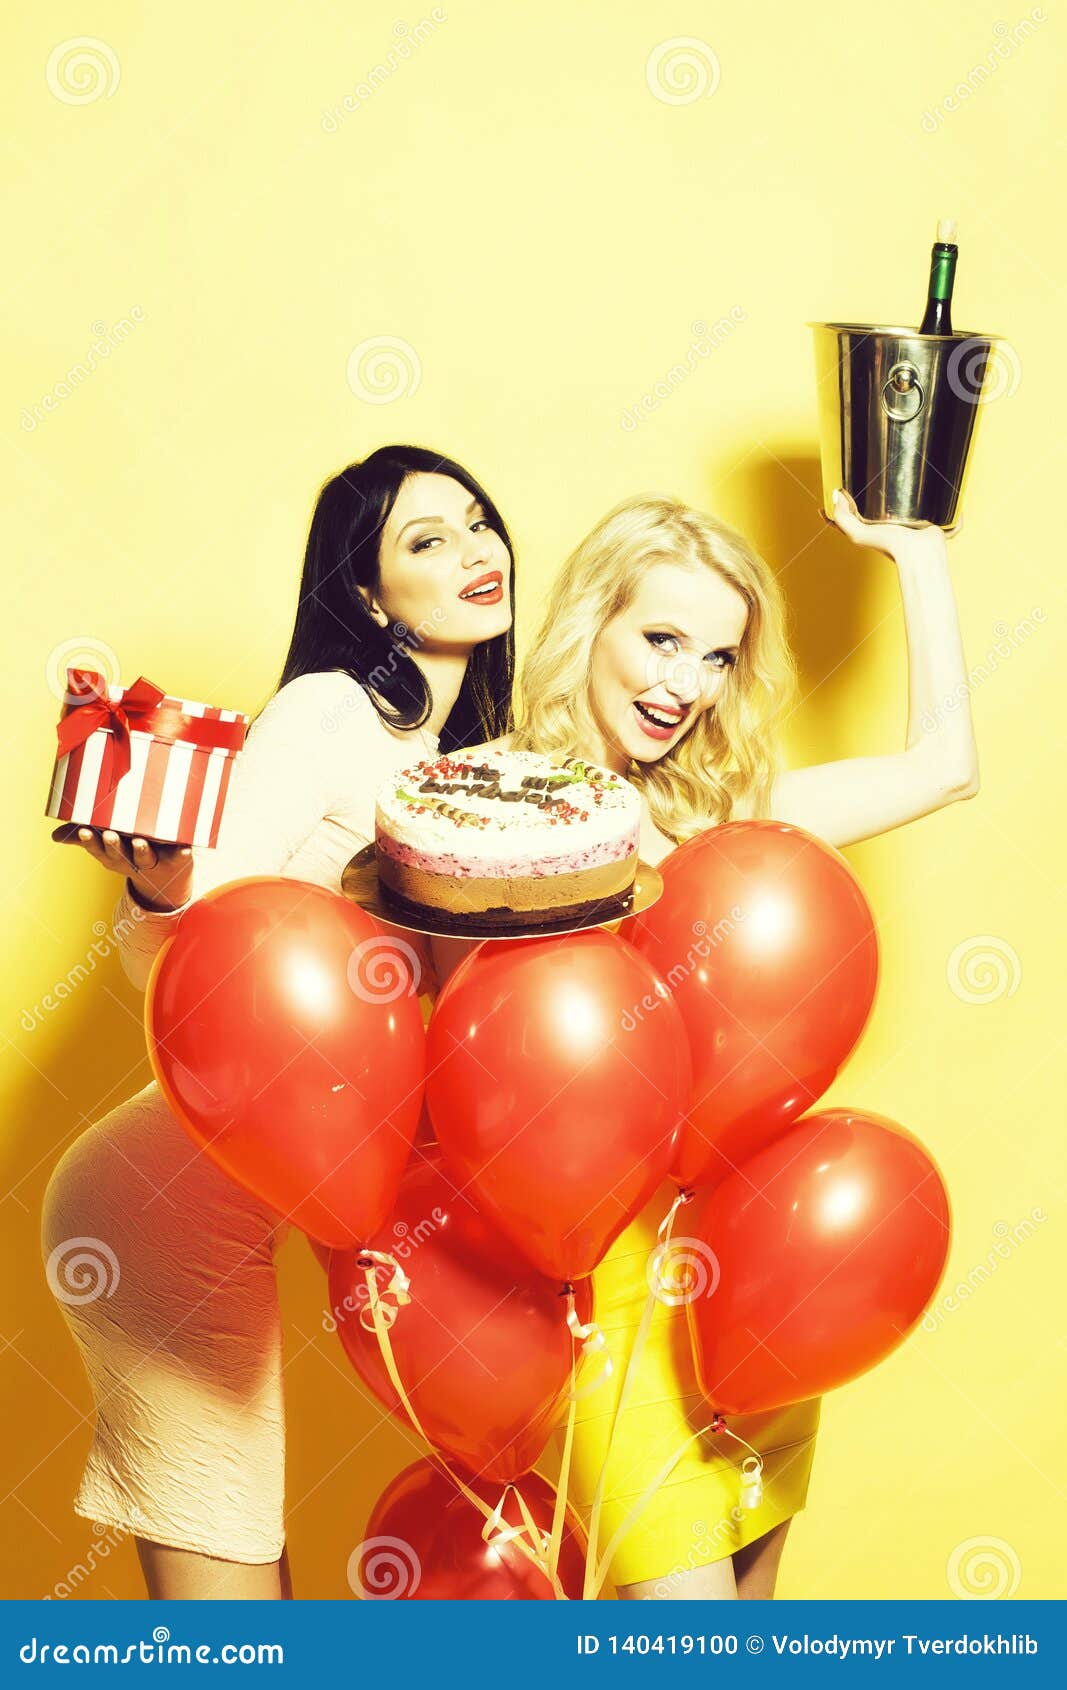 Girls on birthday party stock photo. Image of blonde - 140419100